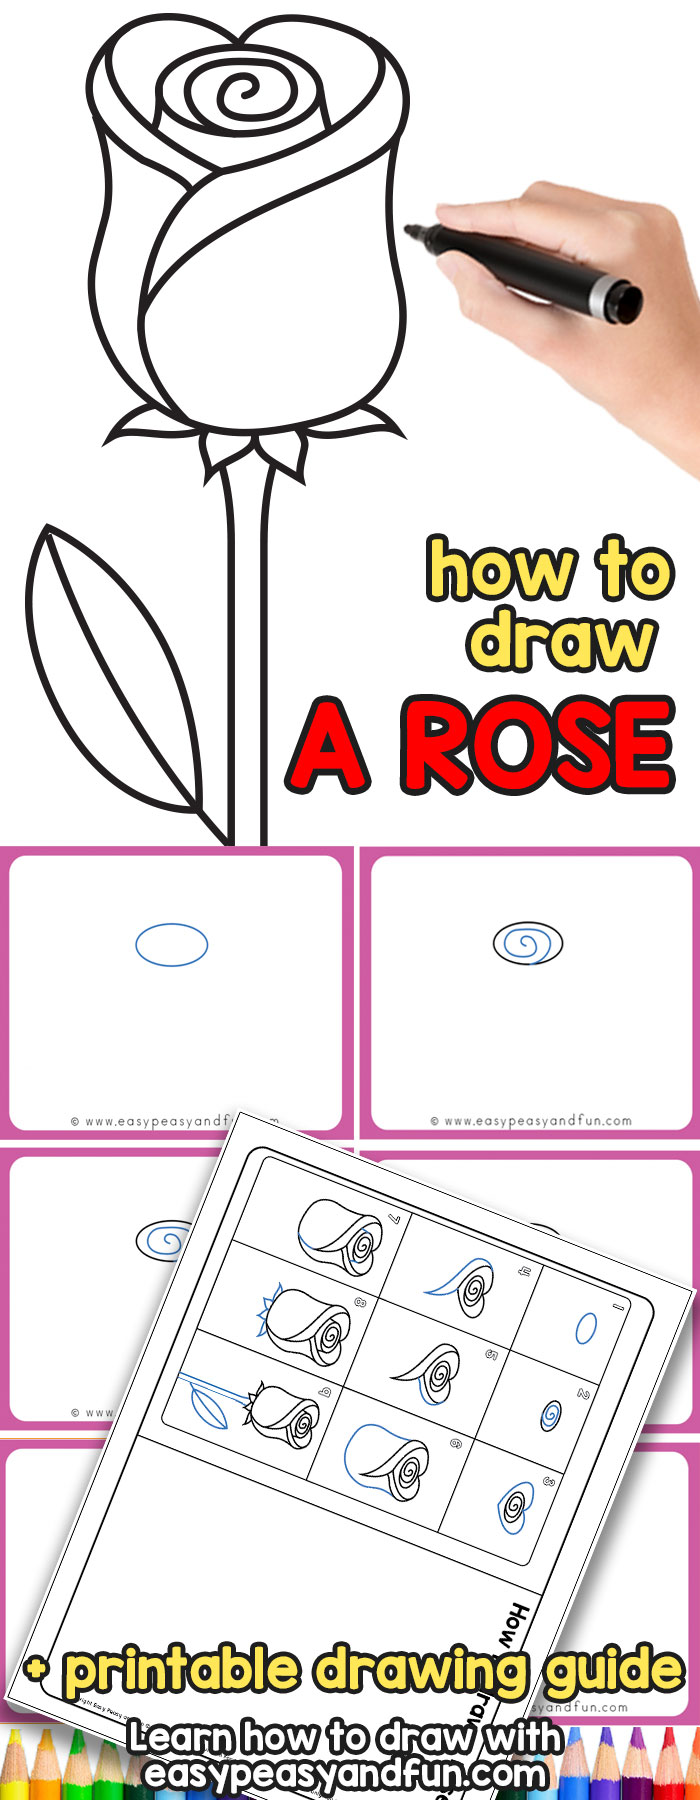 How to Draw a Rose - an easy step by step drawing tutorial for kids and beginners